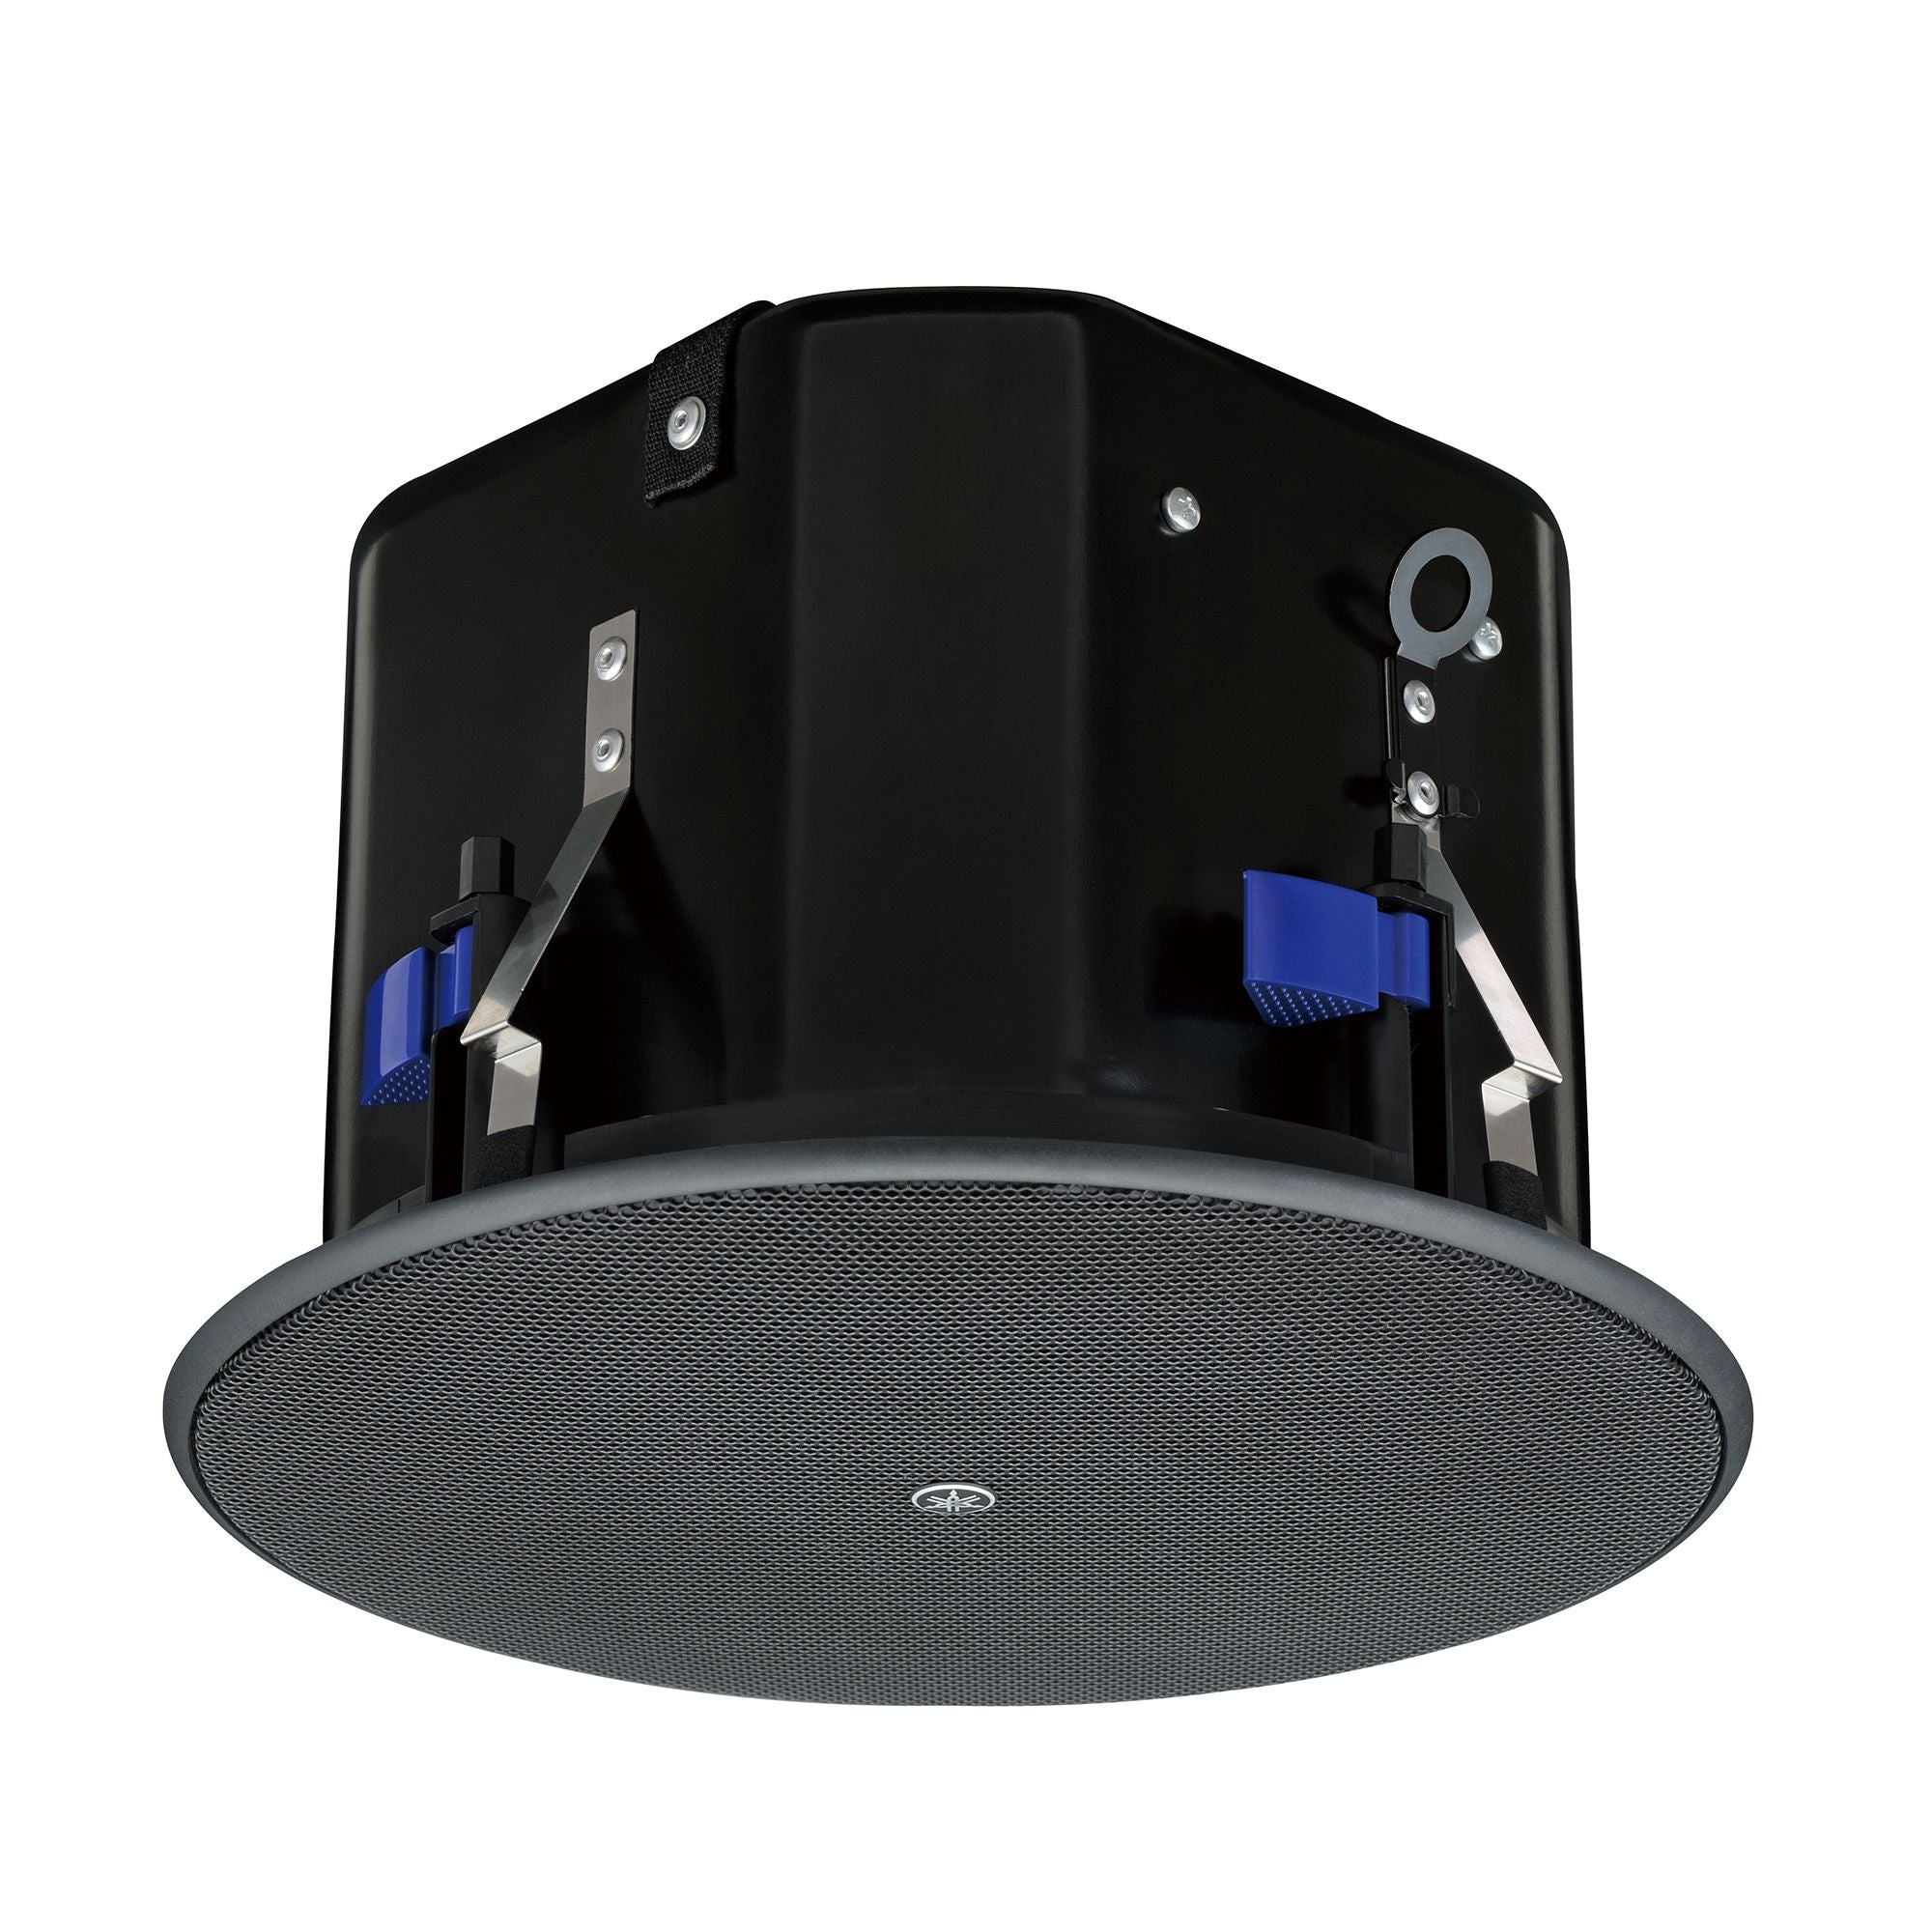 Yamaha VXC6 Ceiling speaker 6.5" cone woofer with a 0.75" soft dome tweeter